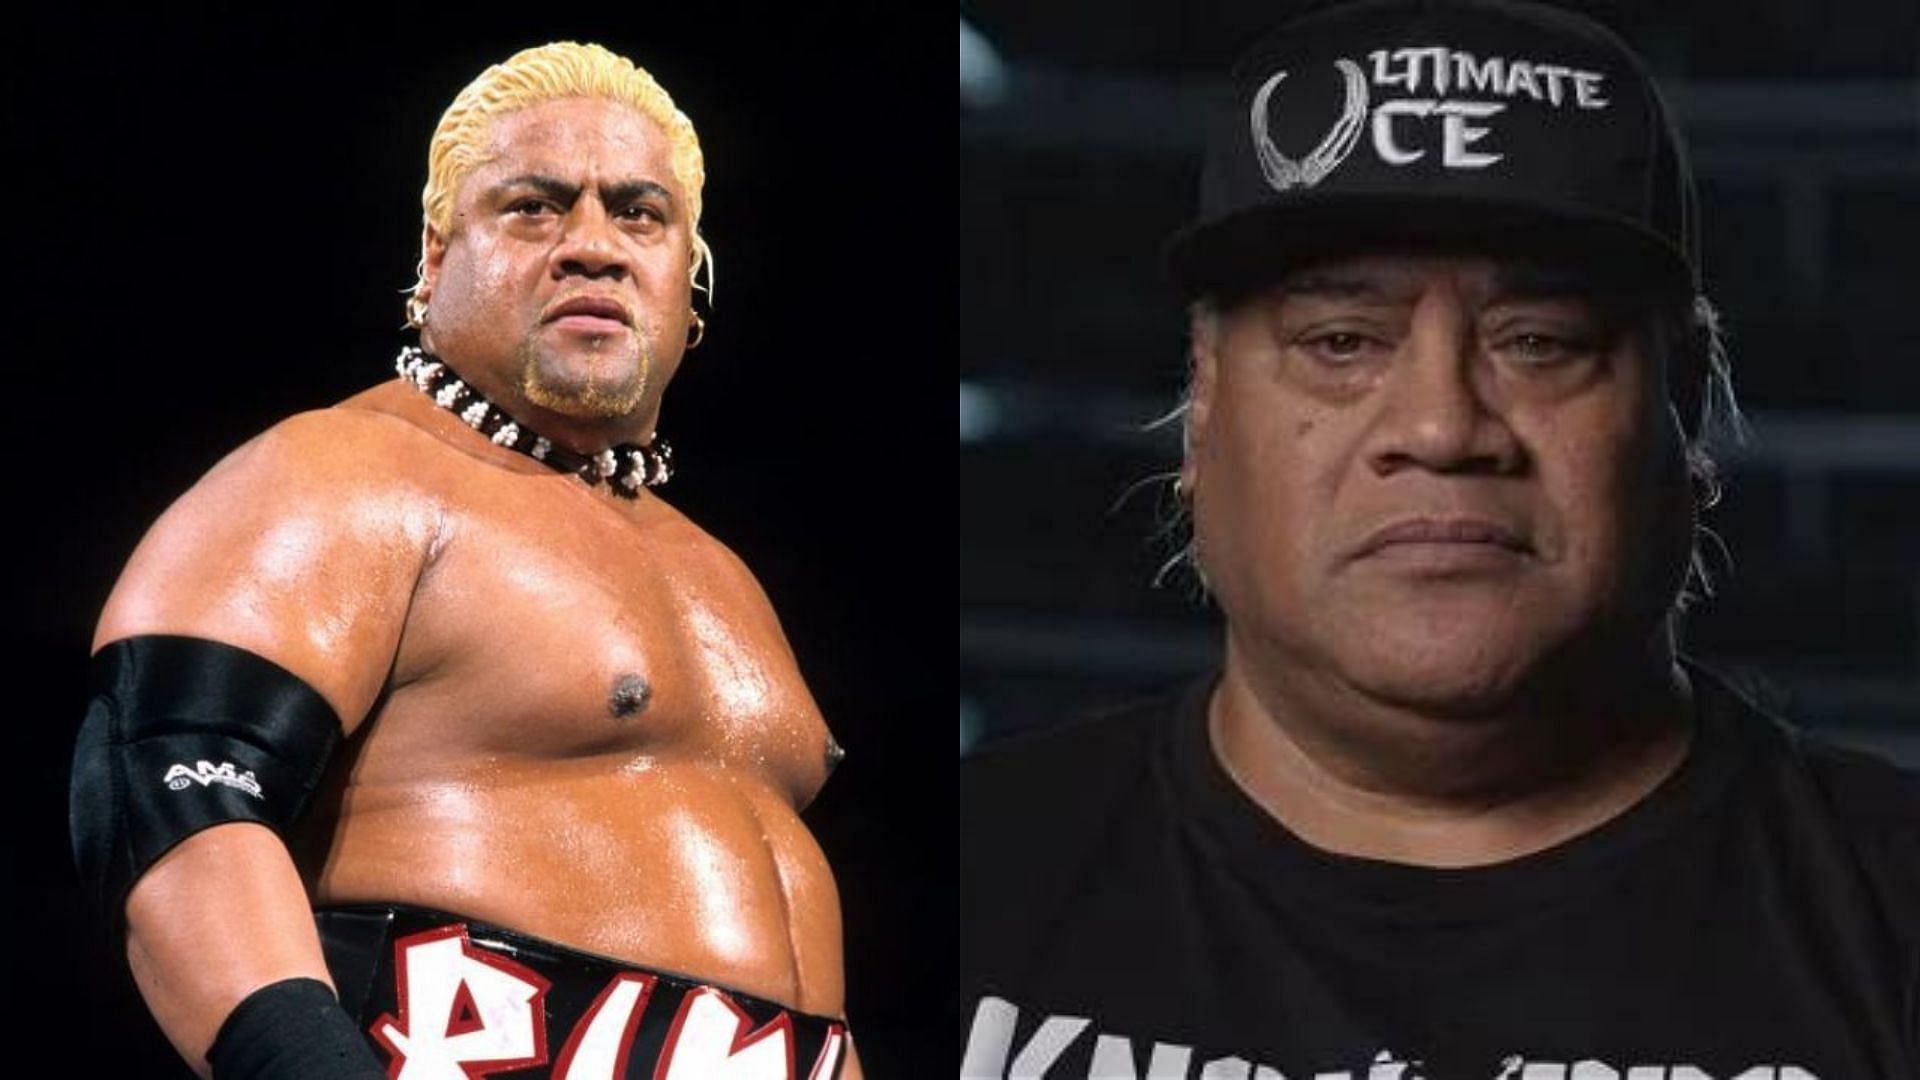 Rikishi had a small reunion with former WWE Superstars.